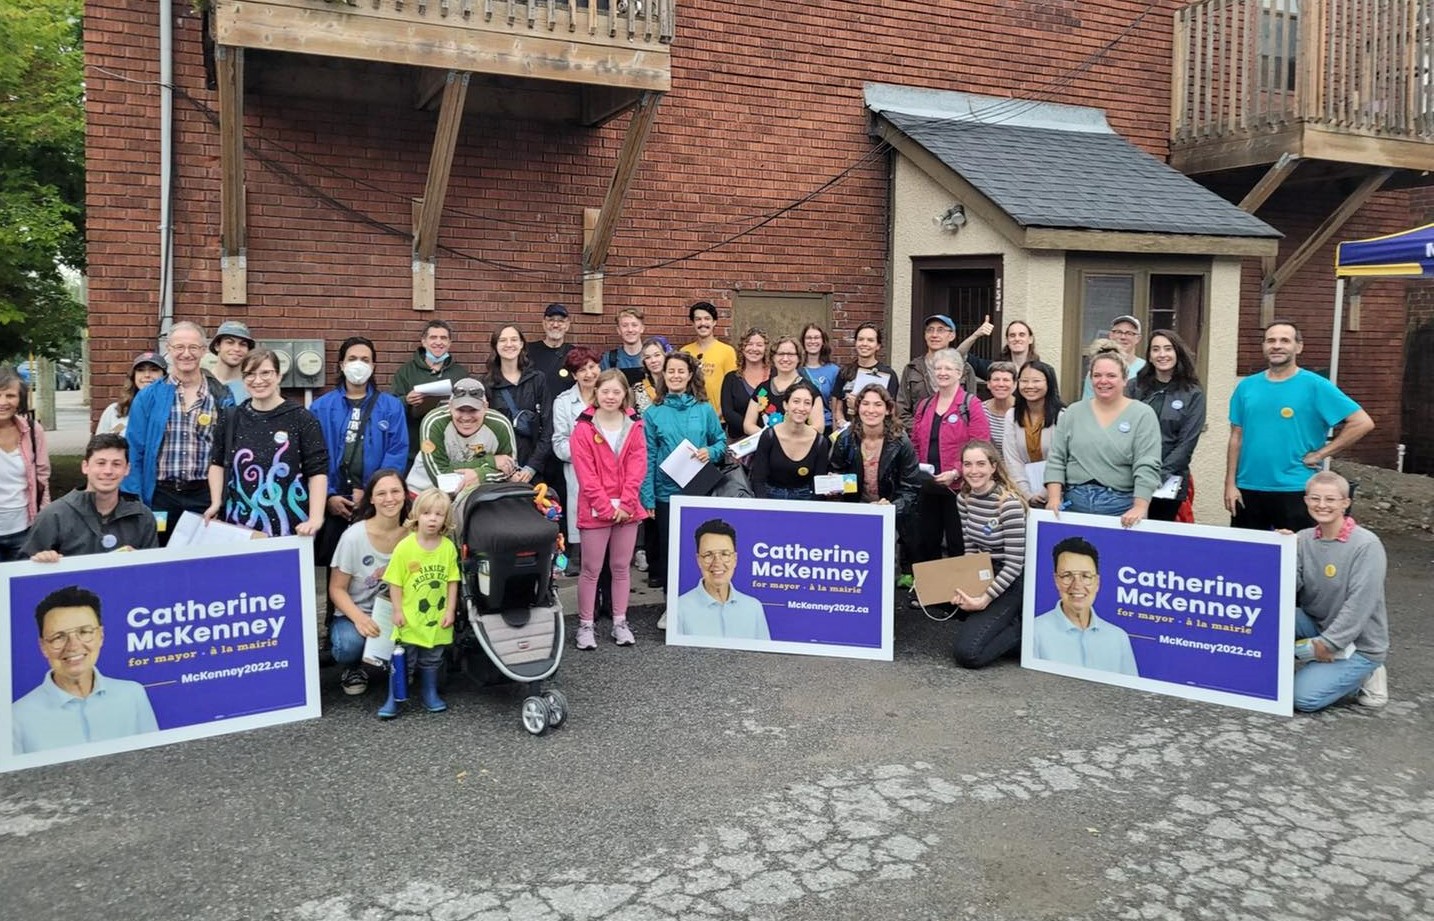 More than 80 volunteers came out to canvass for McKenney on Sunday, Sept. 18.